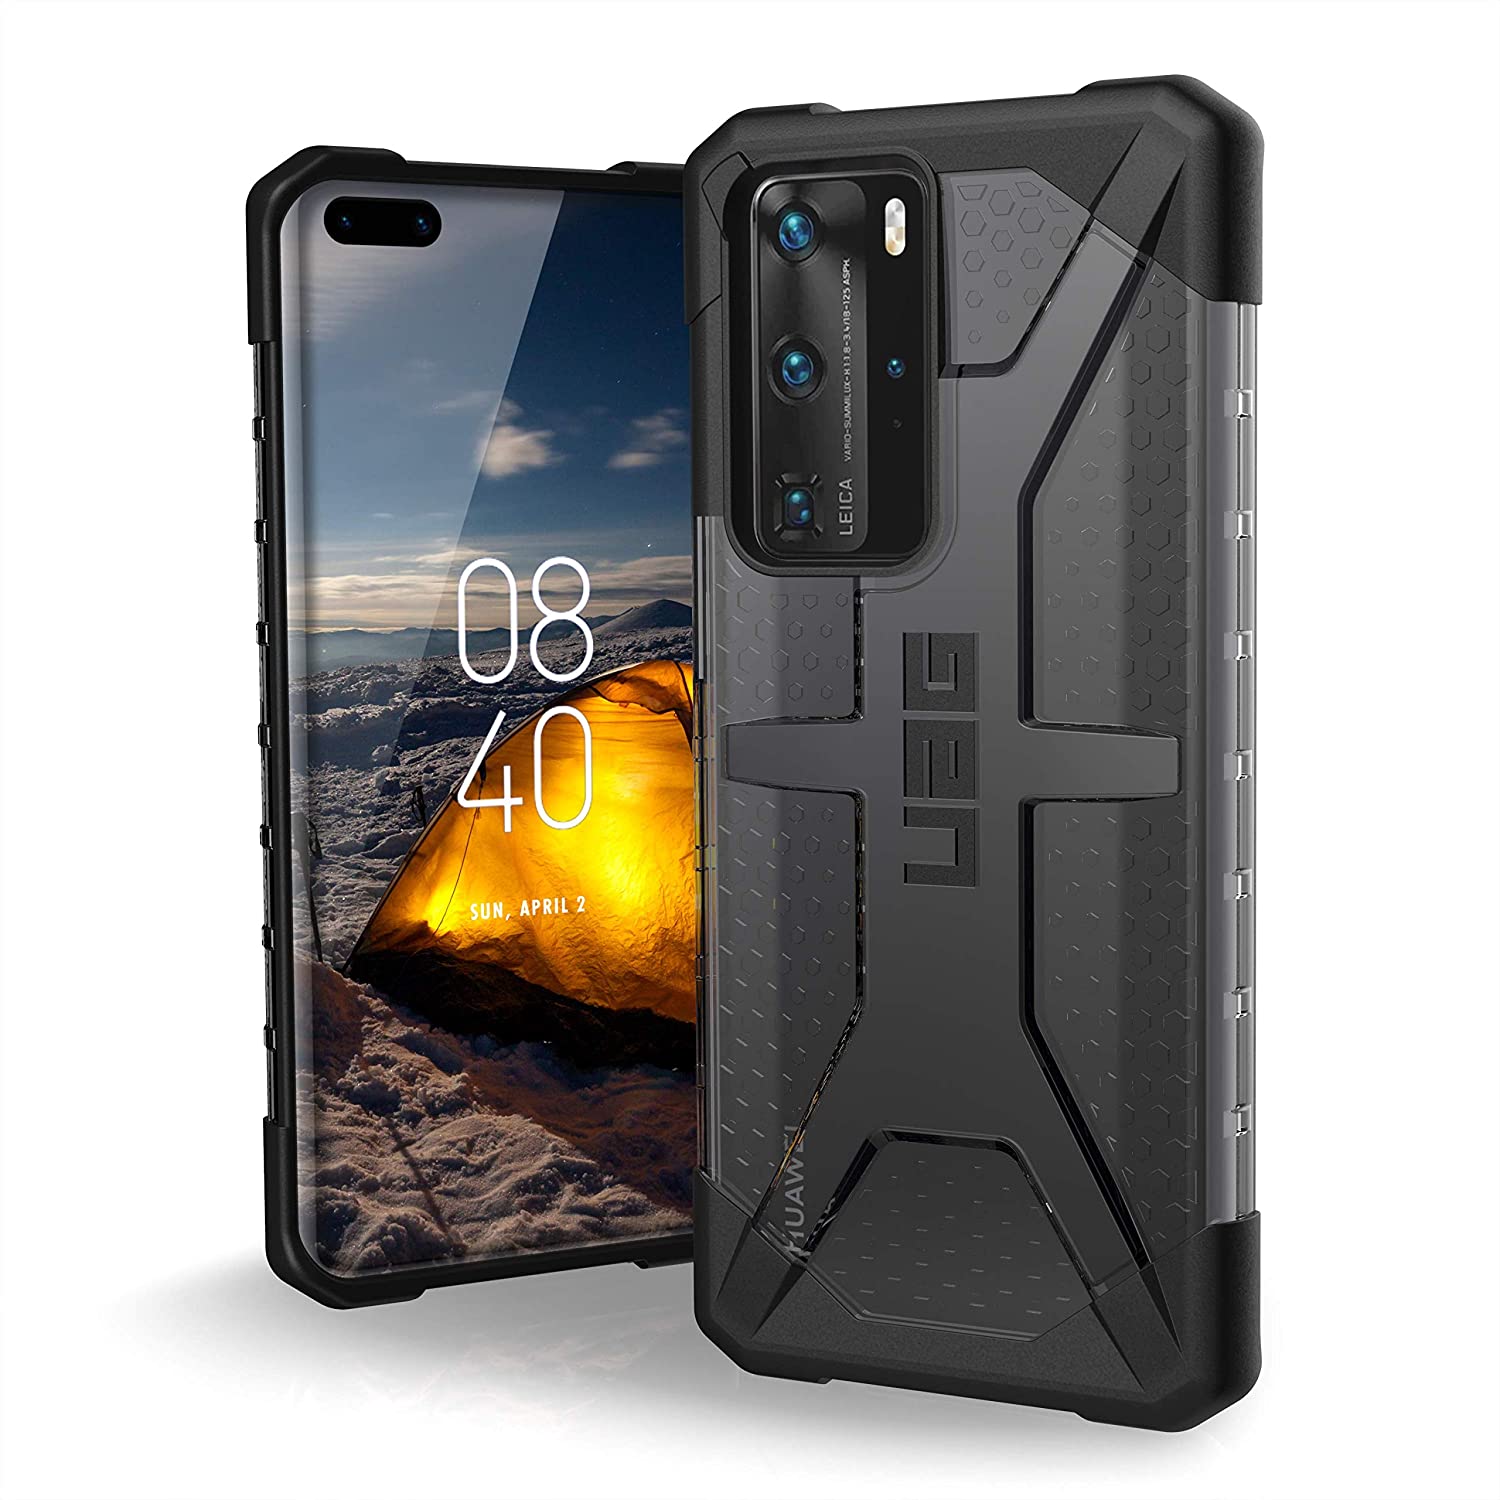 UAG Huawei P40 / P30 Case Plasma [Ash] Rugged Translucent Ultra-Thin Military Drop Tested Protective Cover